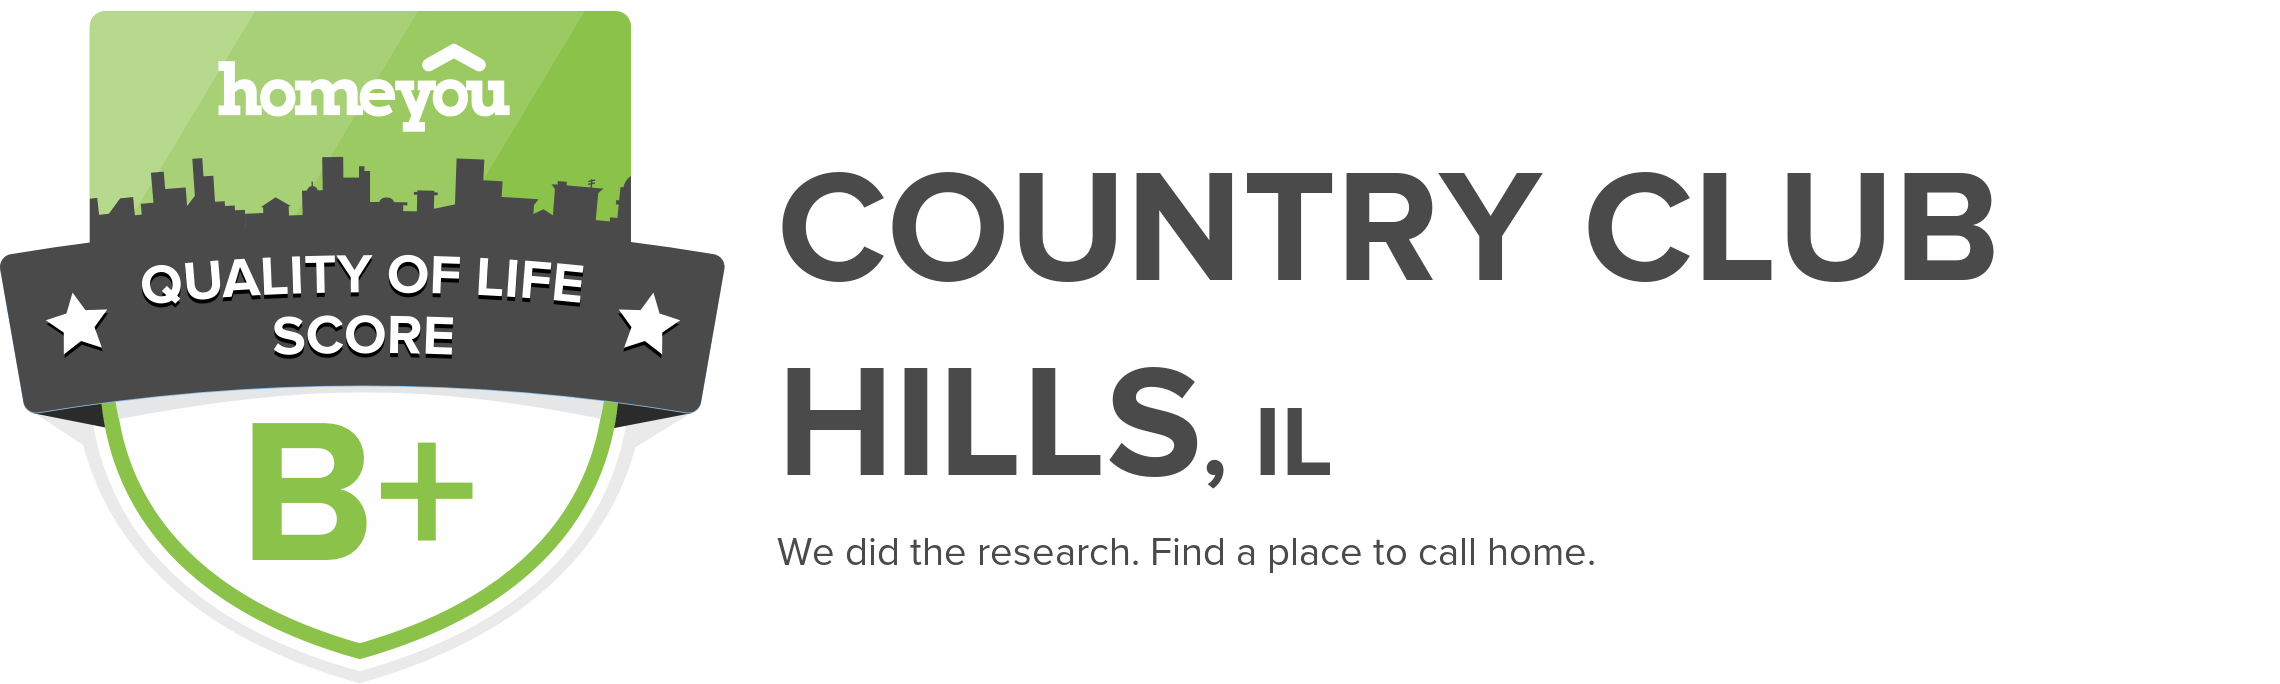 Country Club Hills, IL